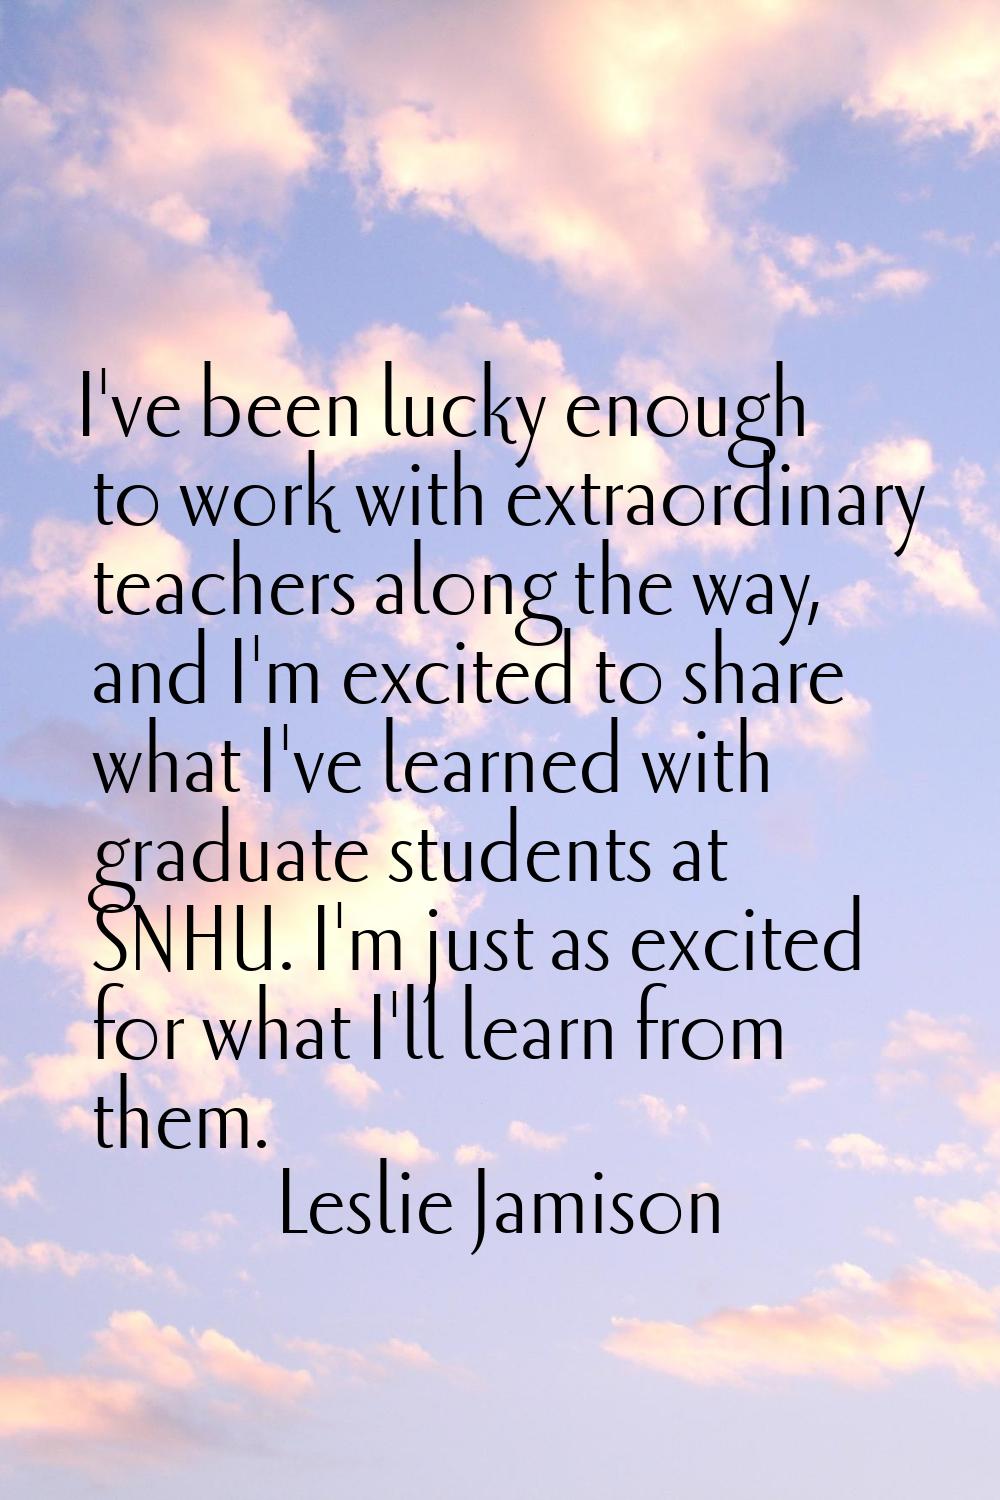 I've been lucky enough to work with extraordinary teachers along the way, and I'm excited to share 